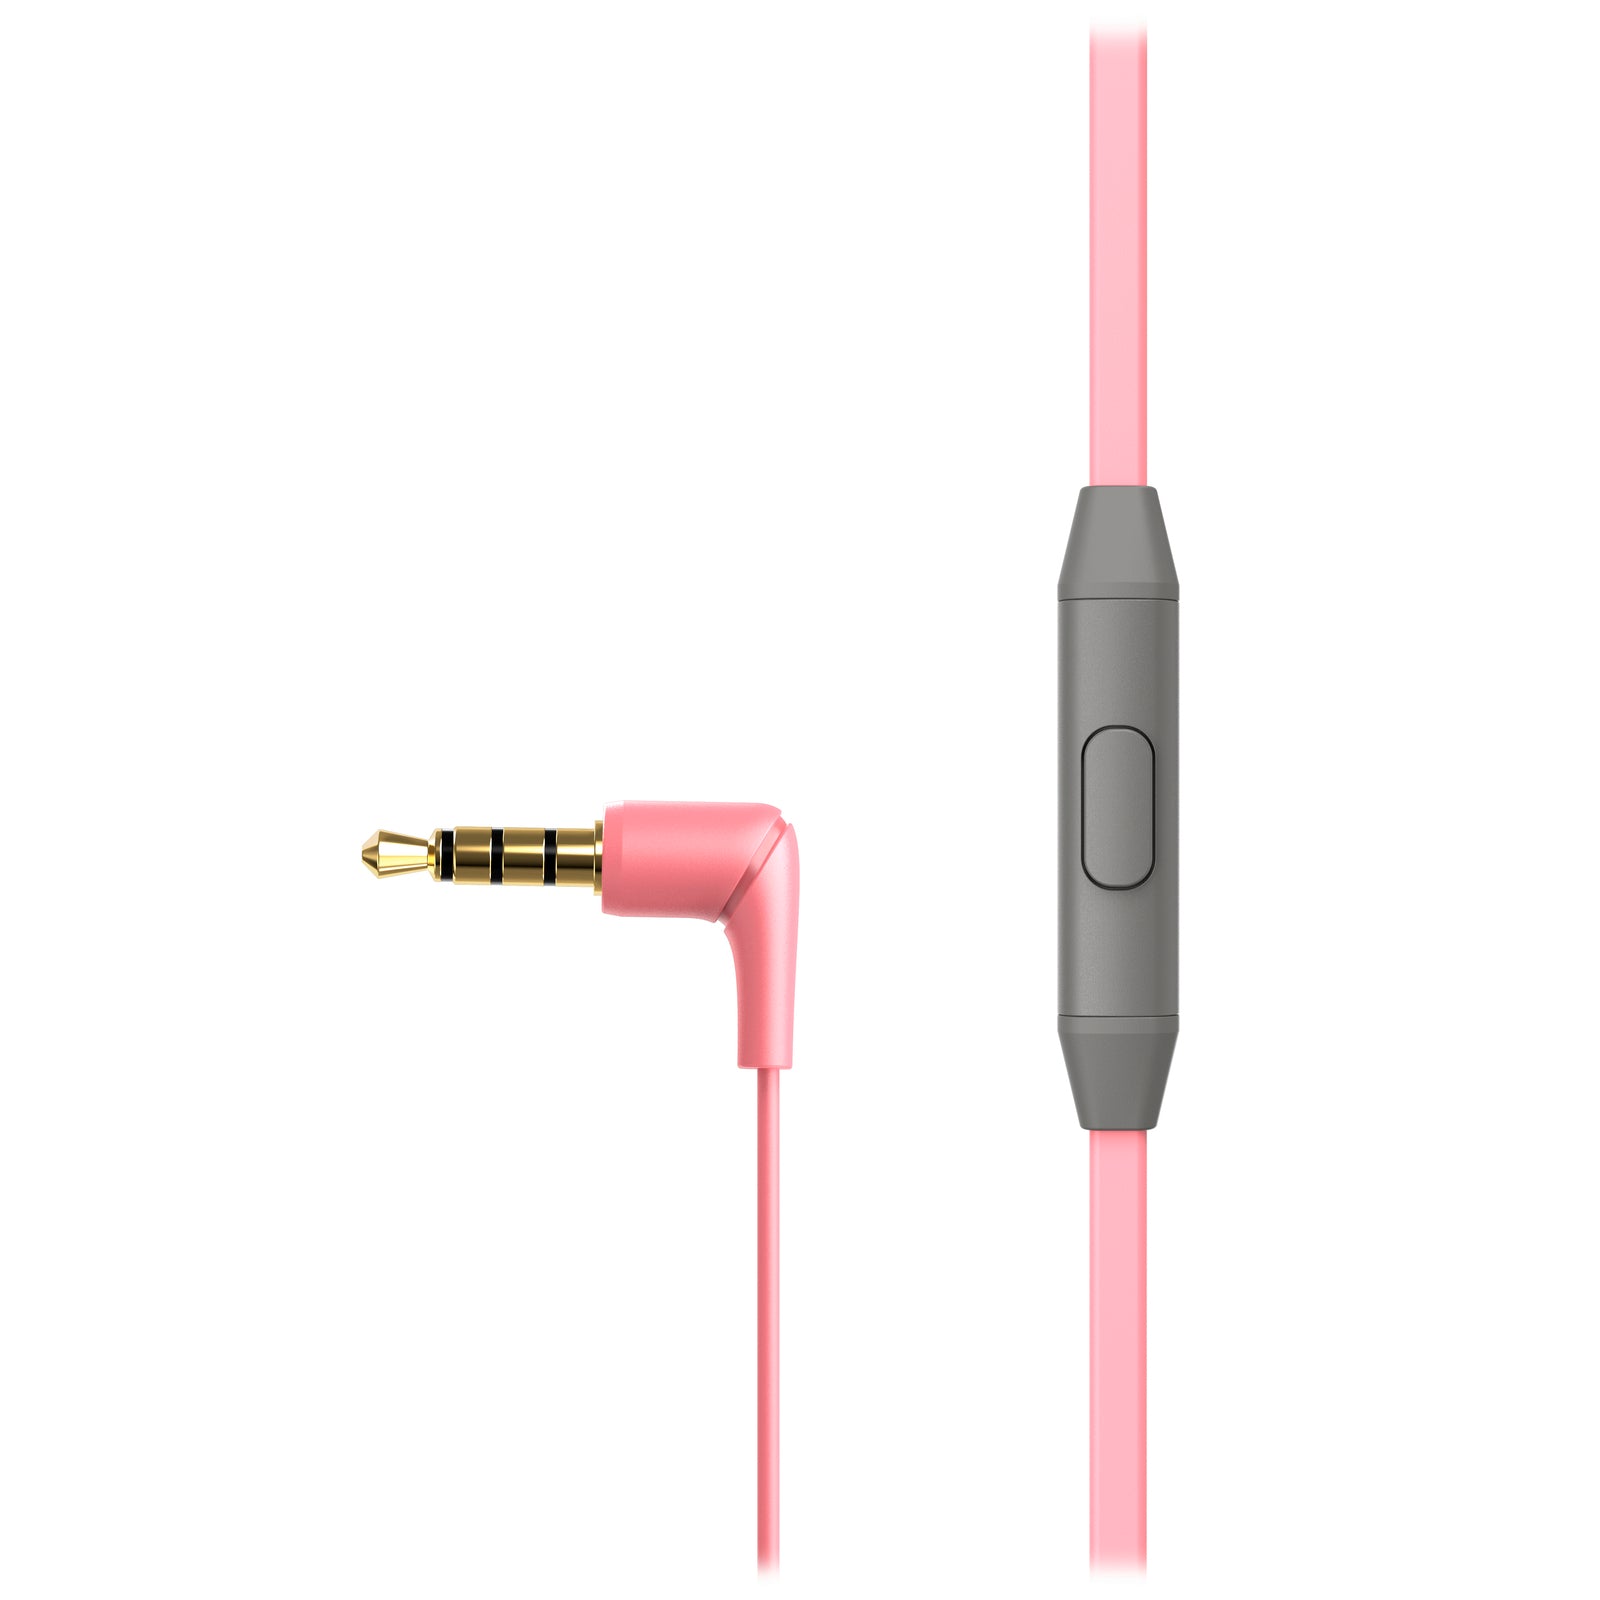 Pink and Grey HyperX Cloud Earbuds Product Image Detailing Cable